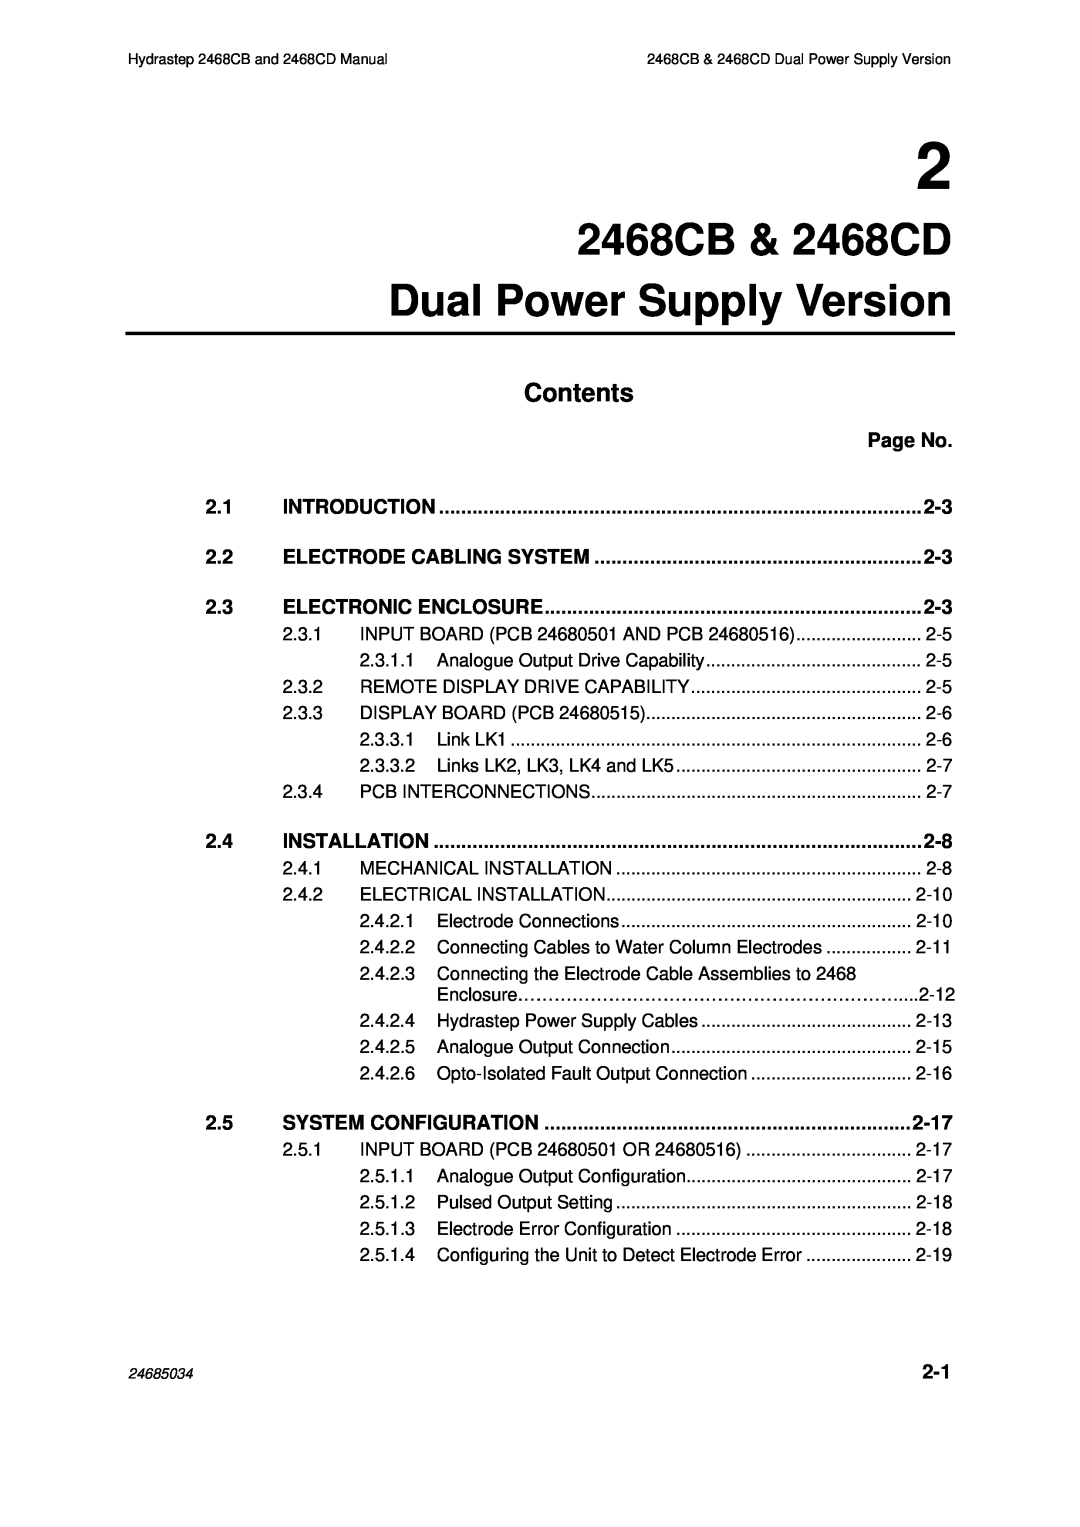 Emerson manual 2468CB & 2468CD Dual Power Supply Version, Contents 